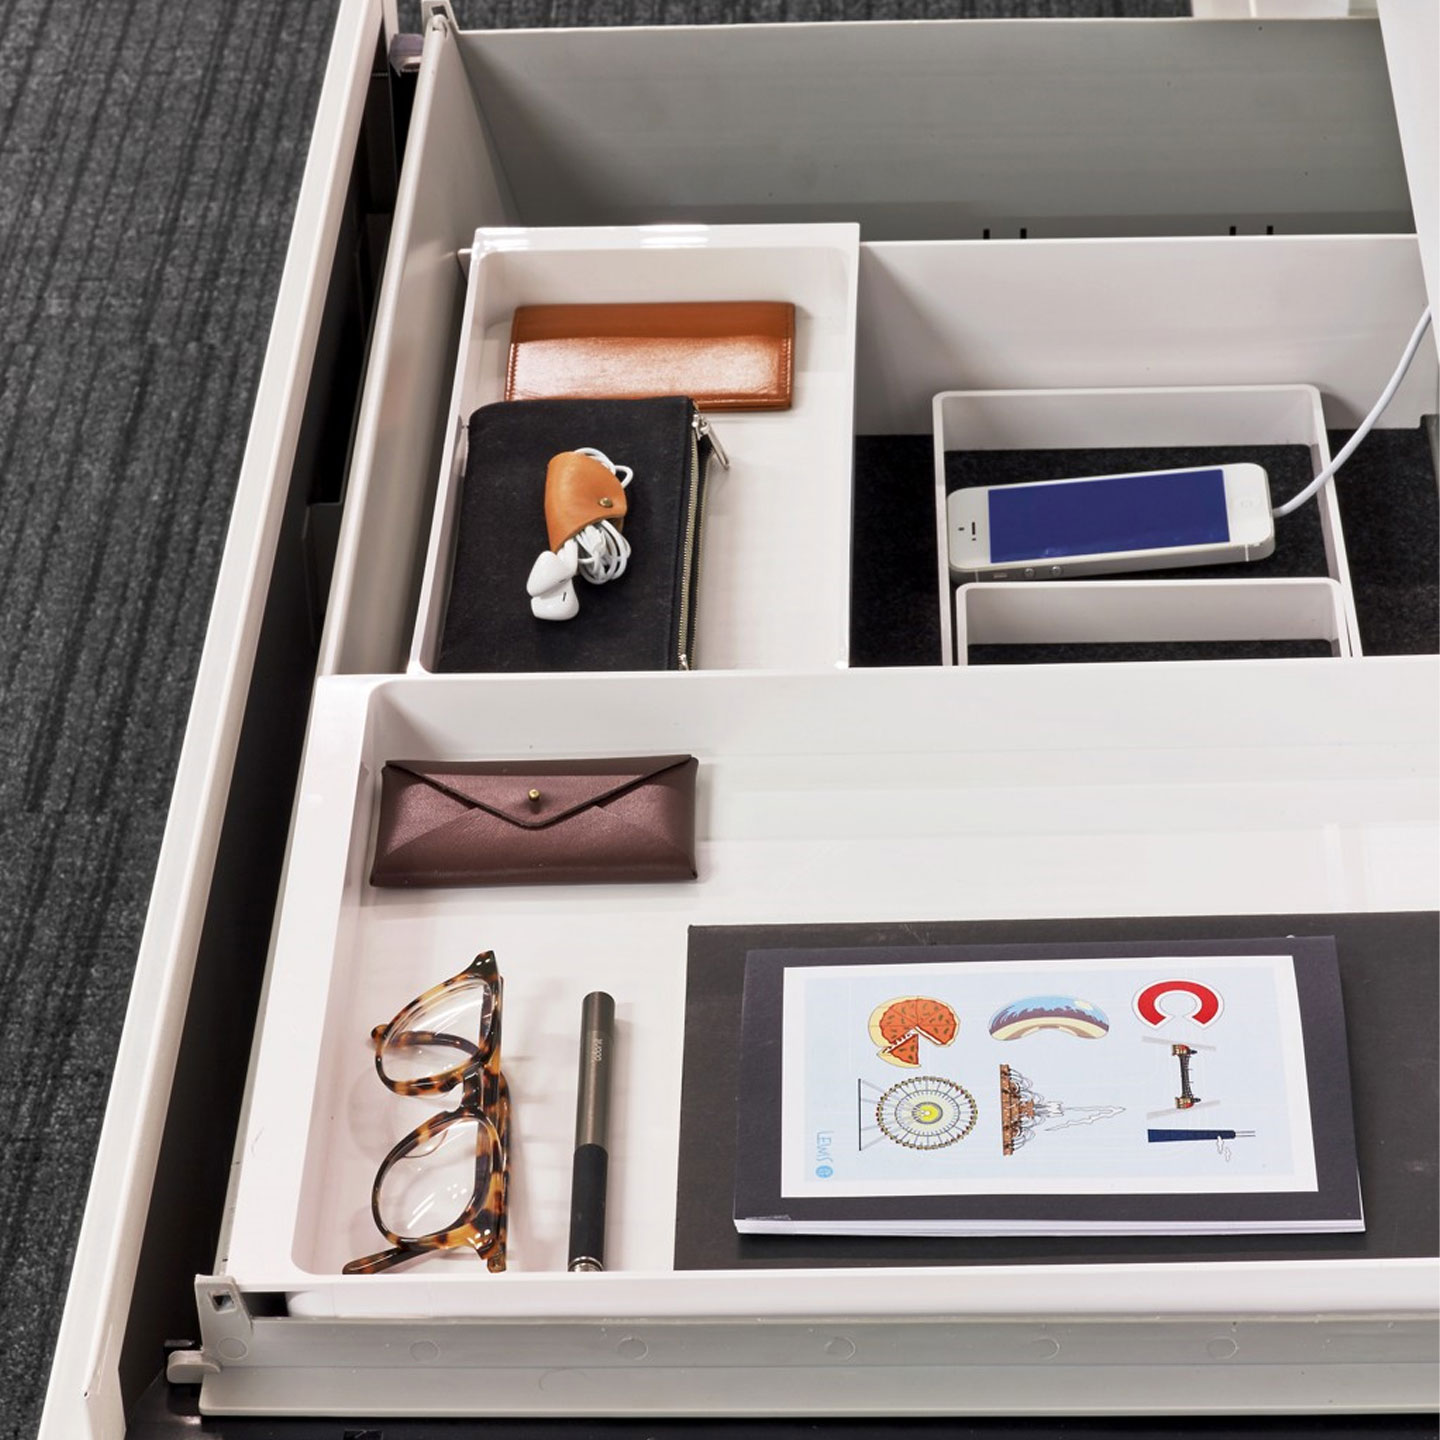 Haworth File Drawer Insert Accessories in office drawer organizing products